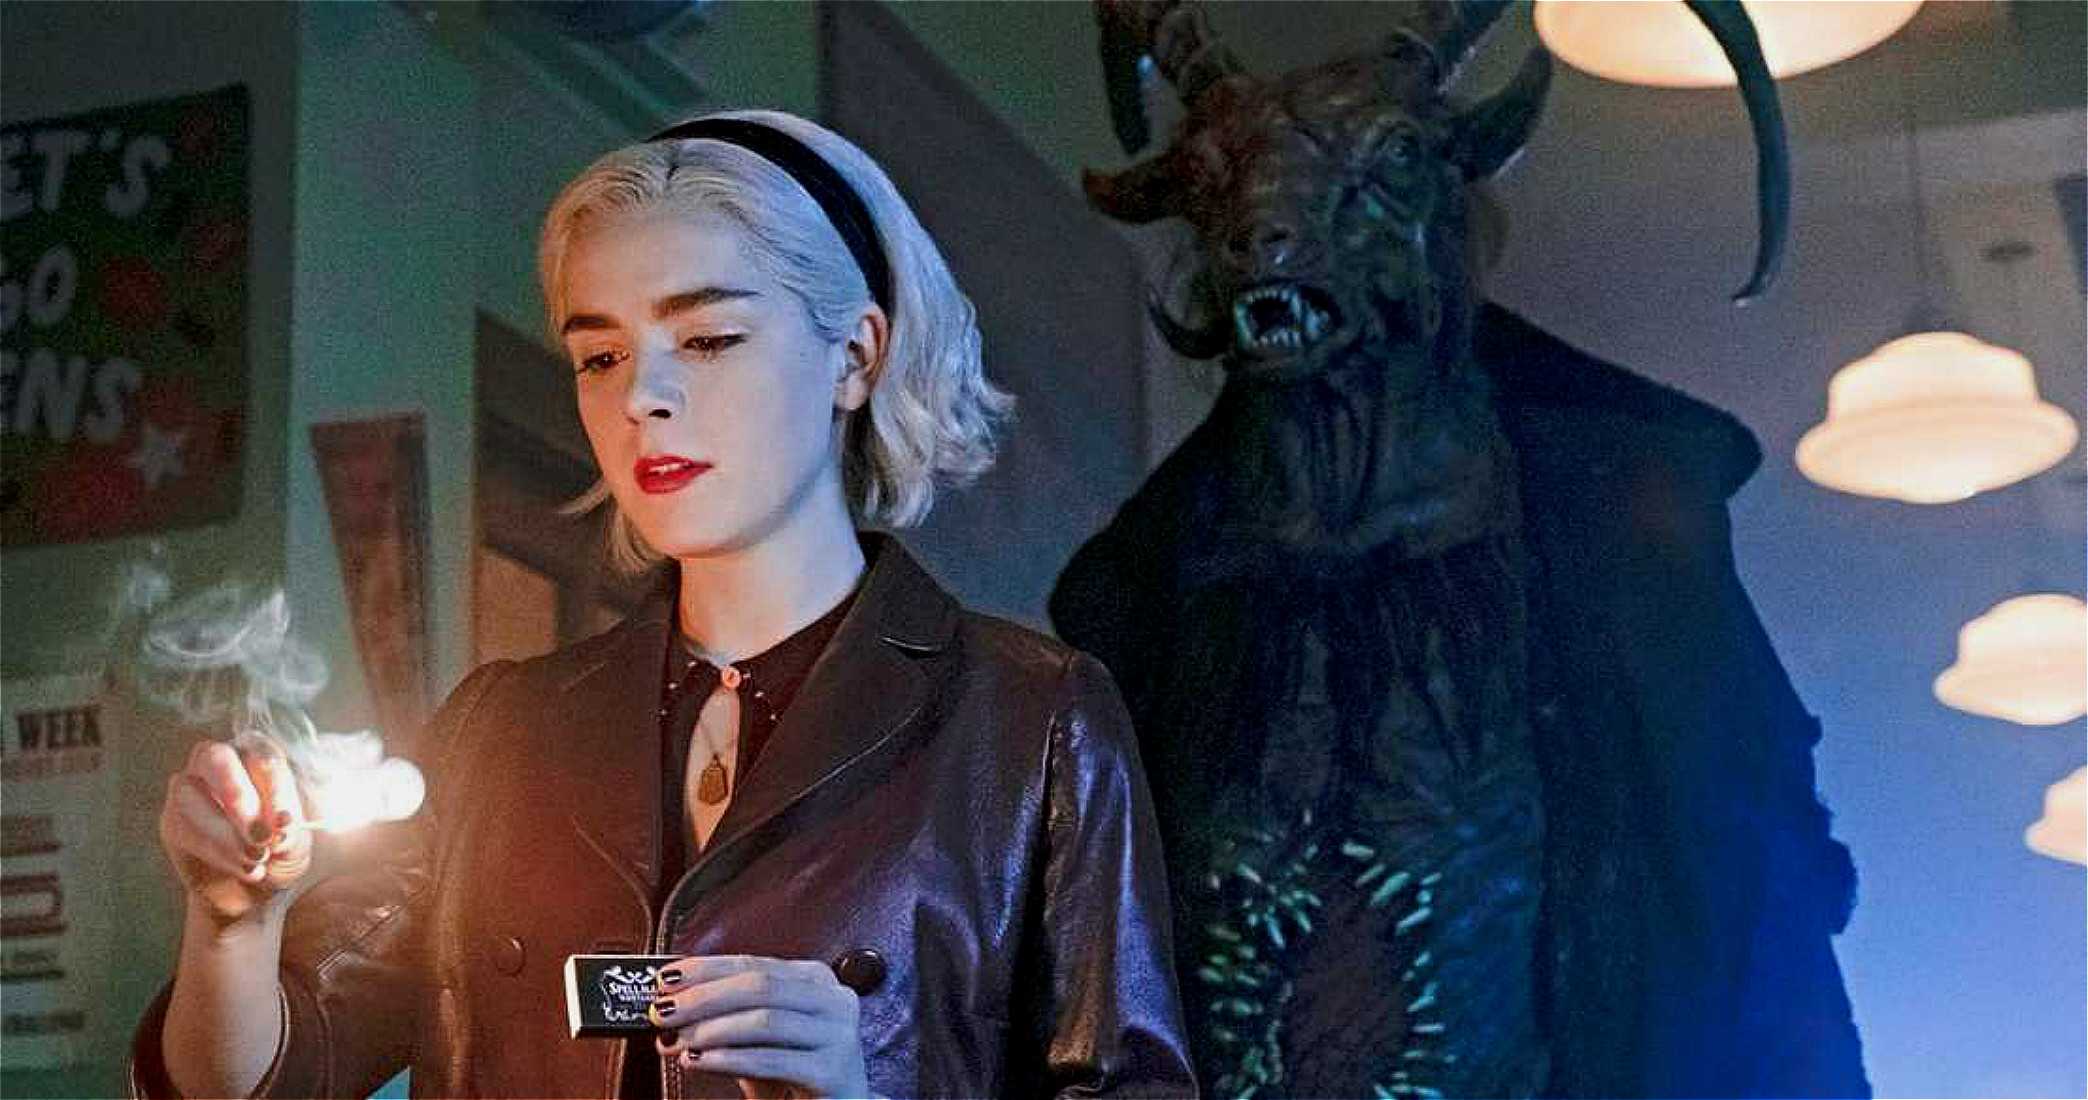 Sabrina lights a match in The Chilling Adventures of Sabrina